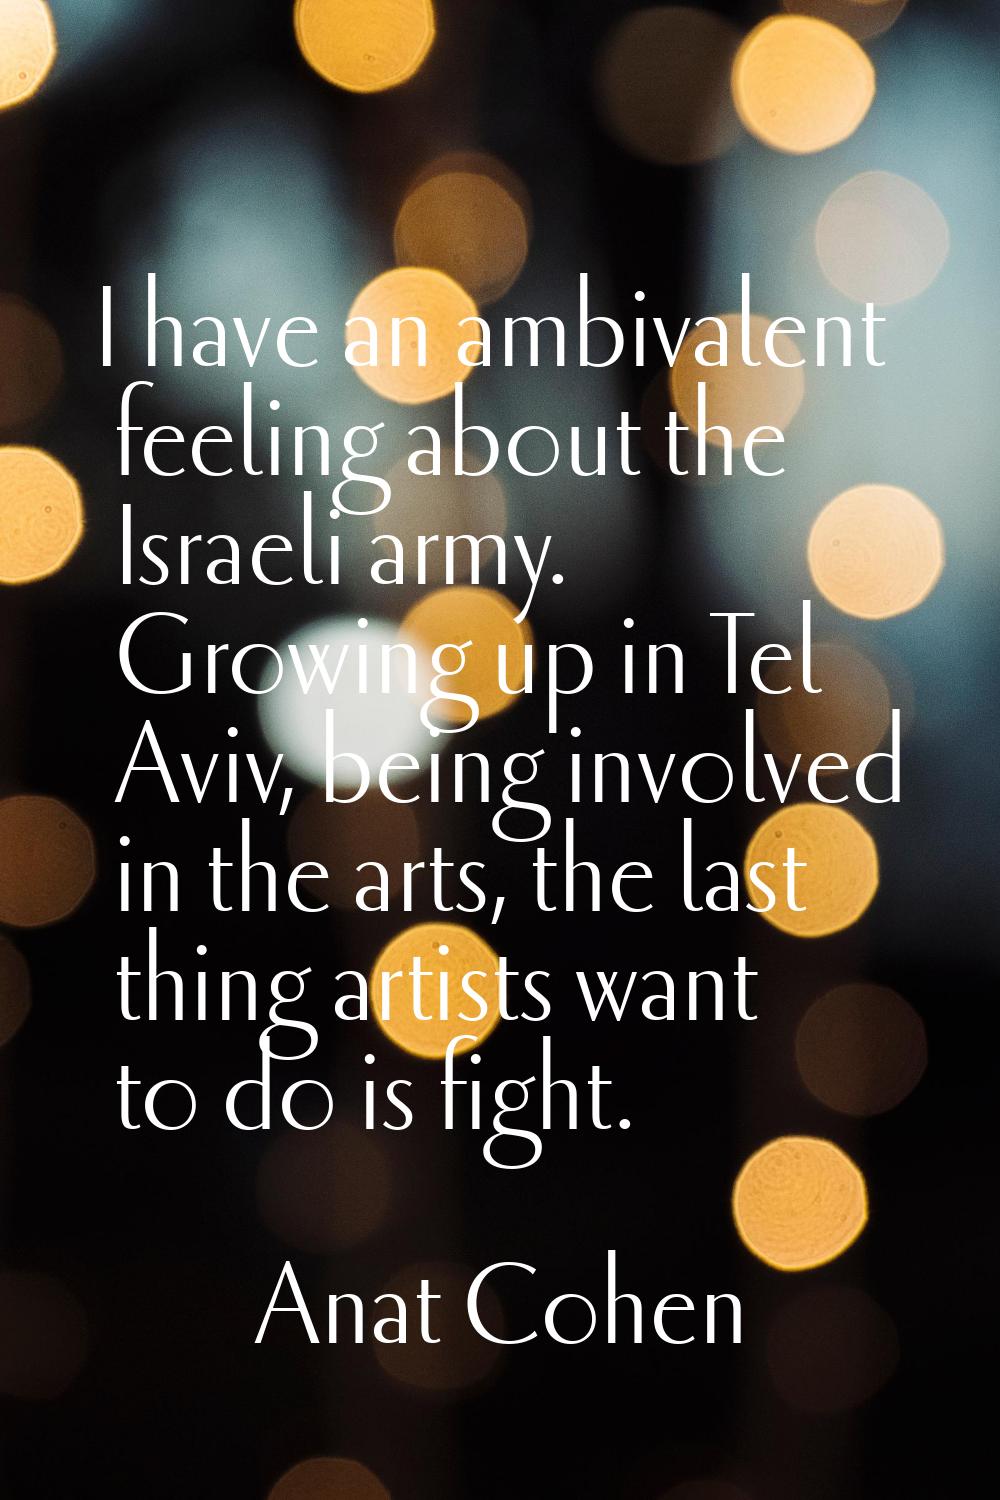 I have an ambivalent feeling about the Israeli army. Growing up in Tel Aviv, being involved in the 